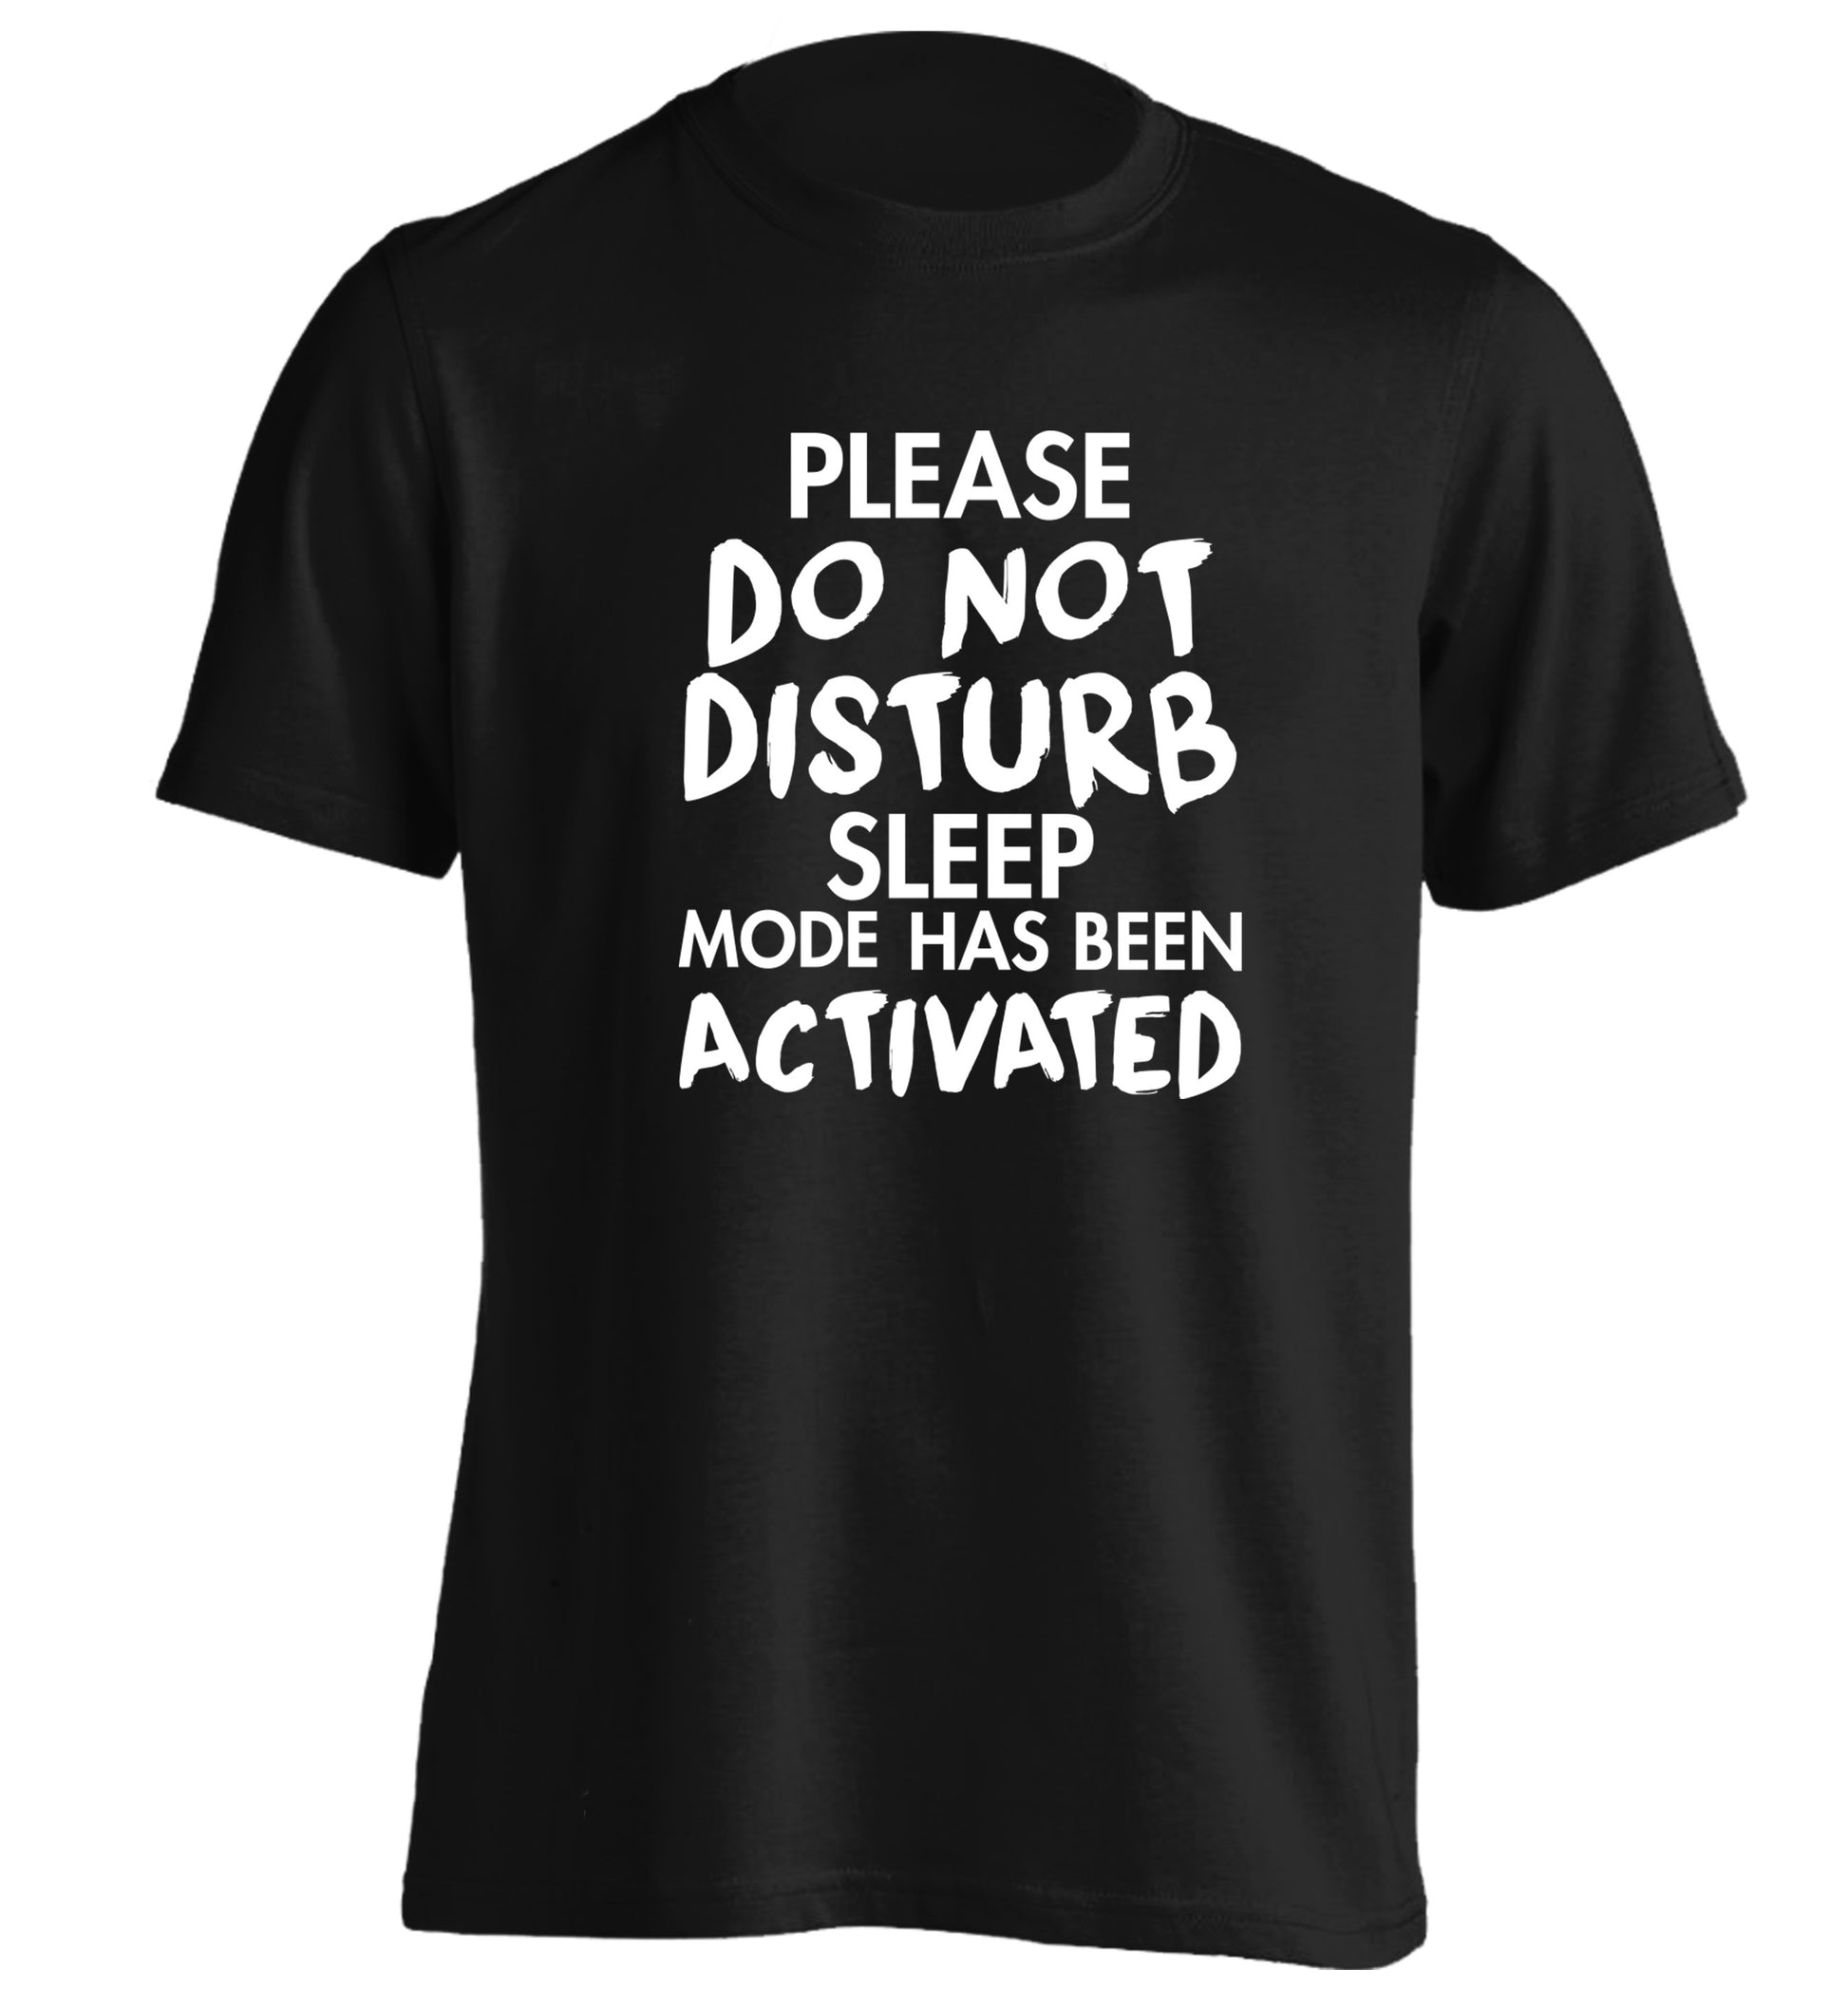 Please do not disturb sleeping mode has been activated adults unisex black Tshirt 2XL